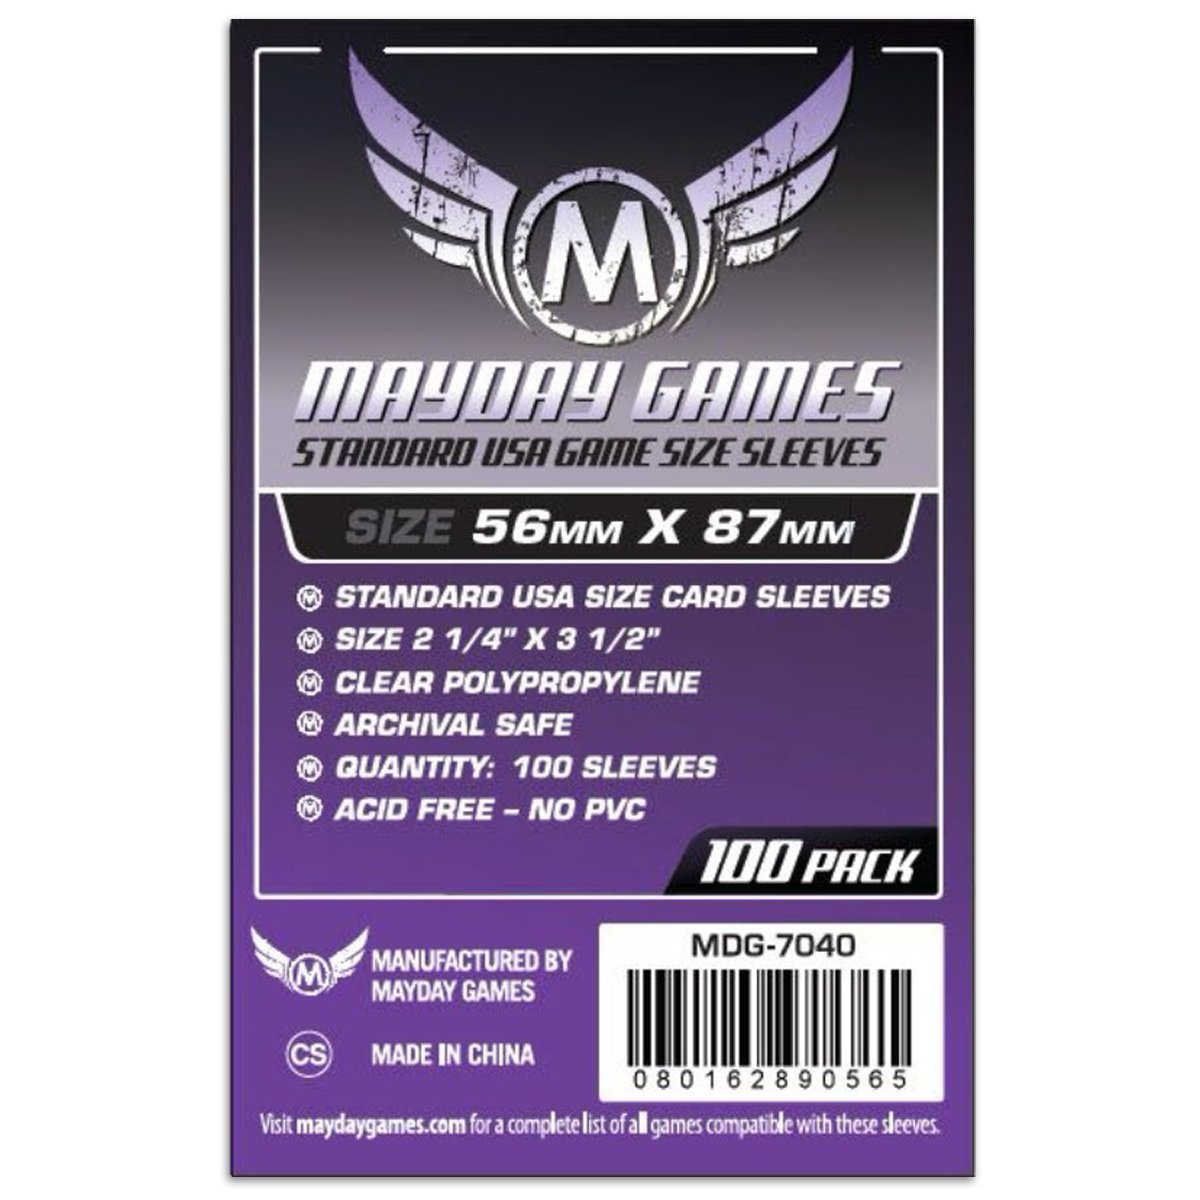 Mayday Premium 80 Card Sleeves 65mm x 100mm, Accessories